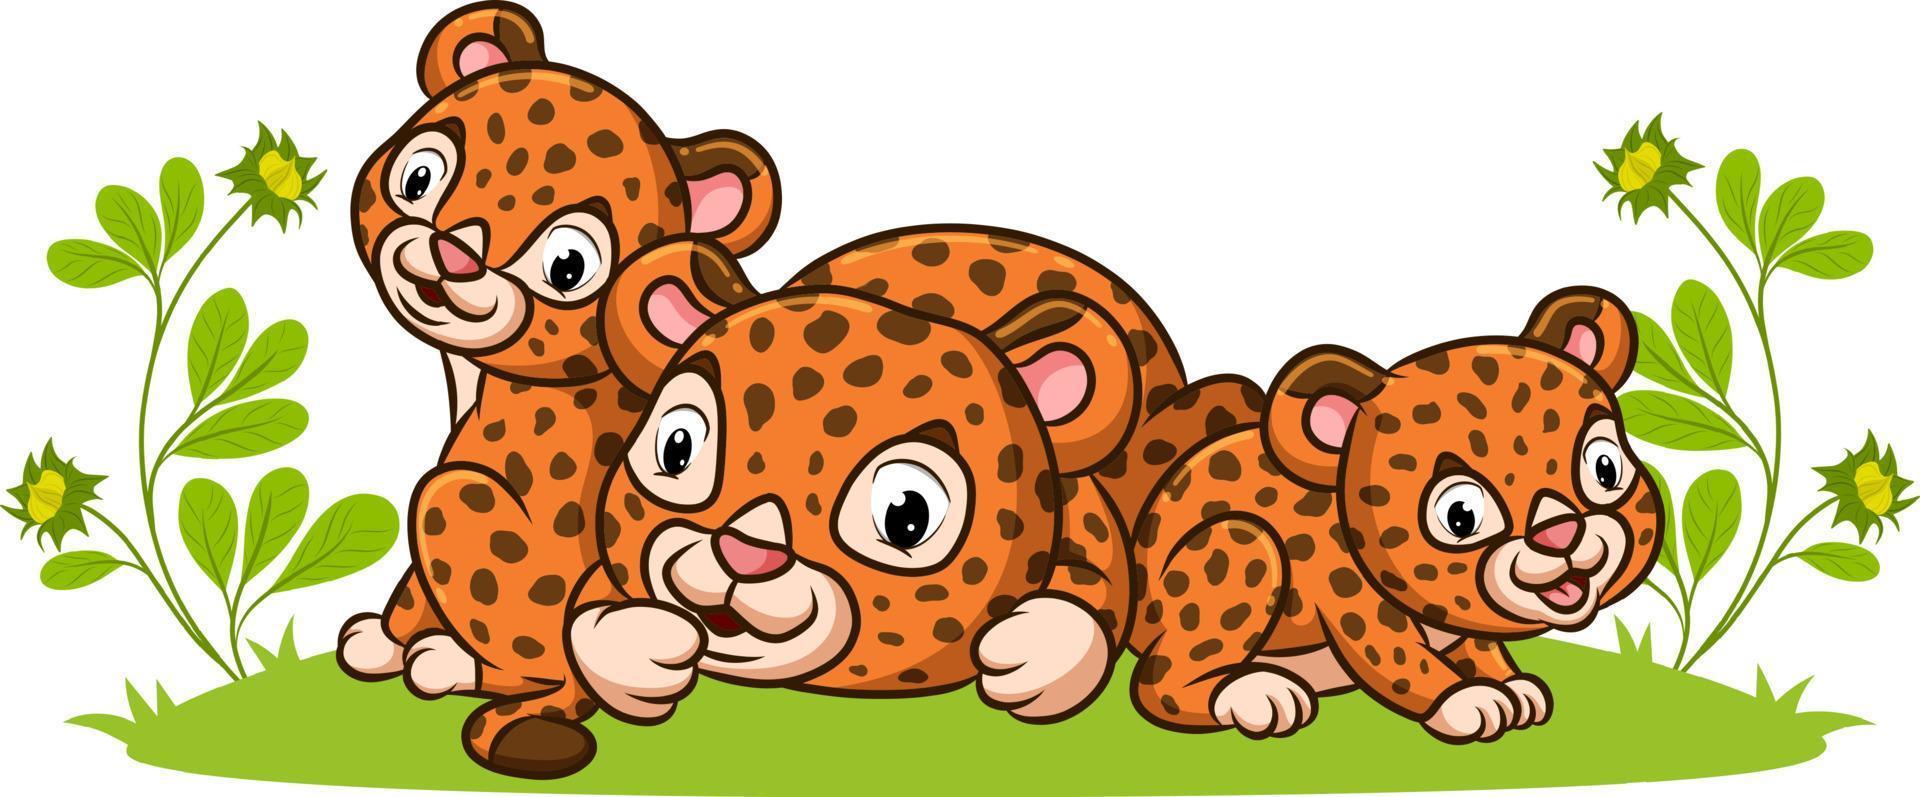 The three leopards are playing together in the garden full of the flowers vector